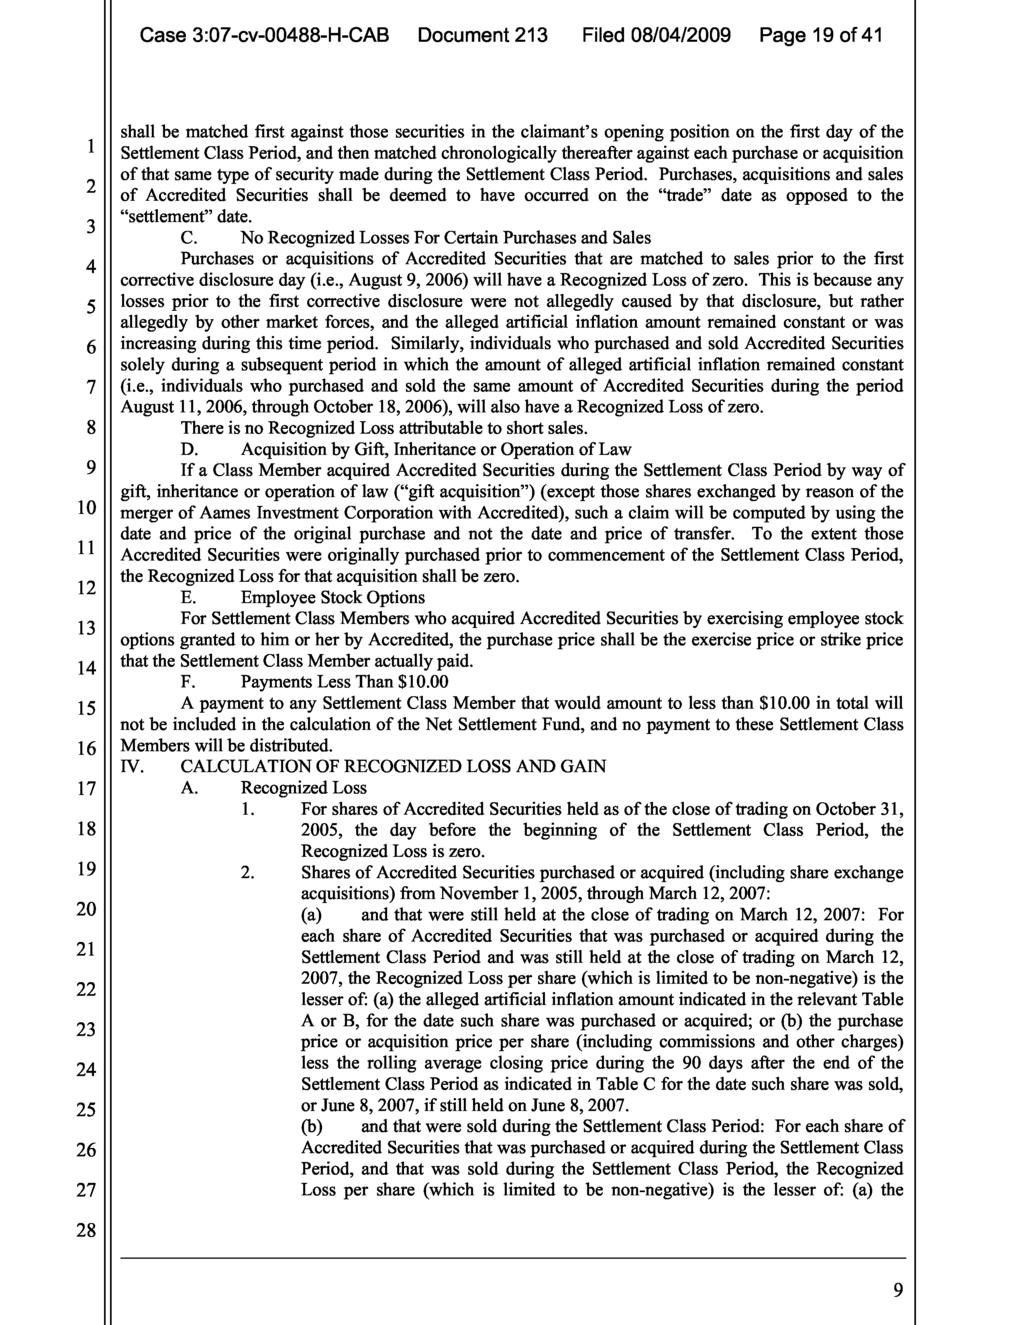 Case 3:07-cv-0088-H-CAB Document 213 Filed 08/0/2009 Page 19 of 1 shall be matched first against those securities in the claimant s opening position on the first day of the 1 Settlement Class Period,